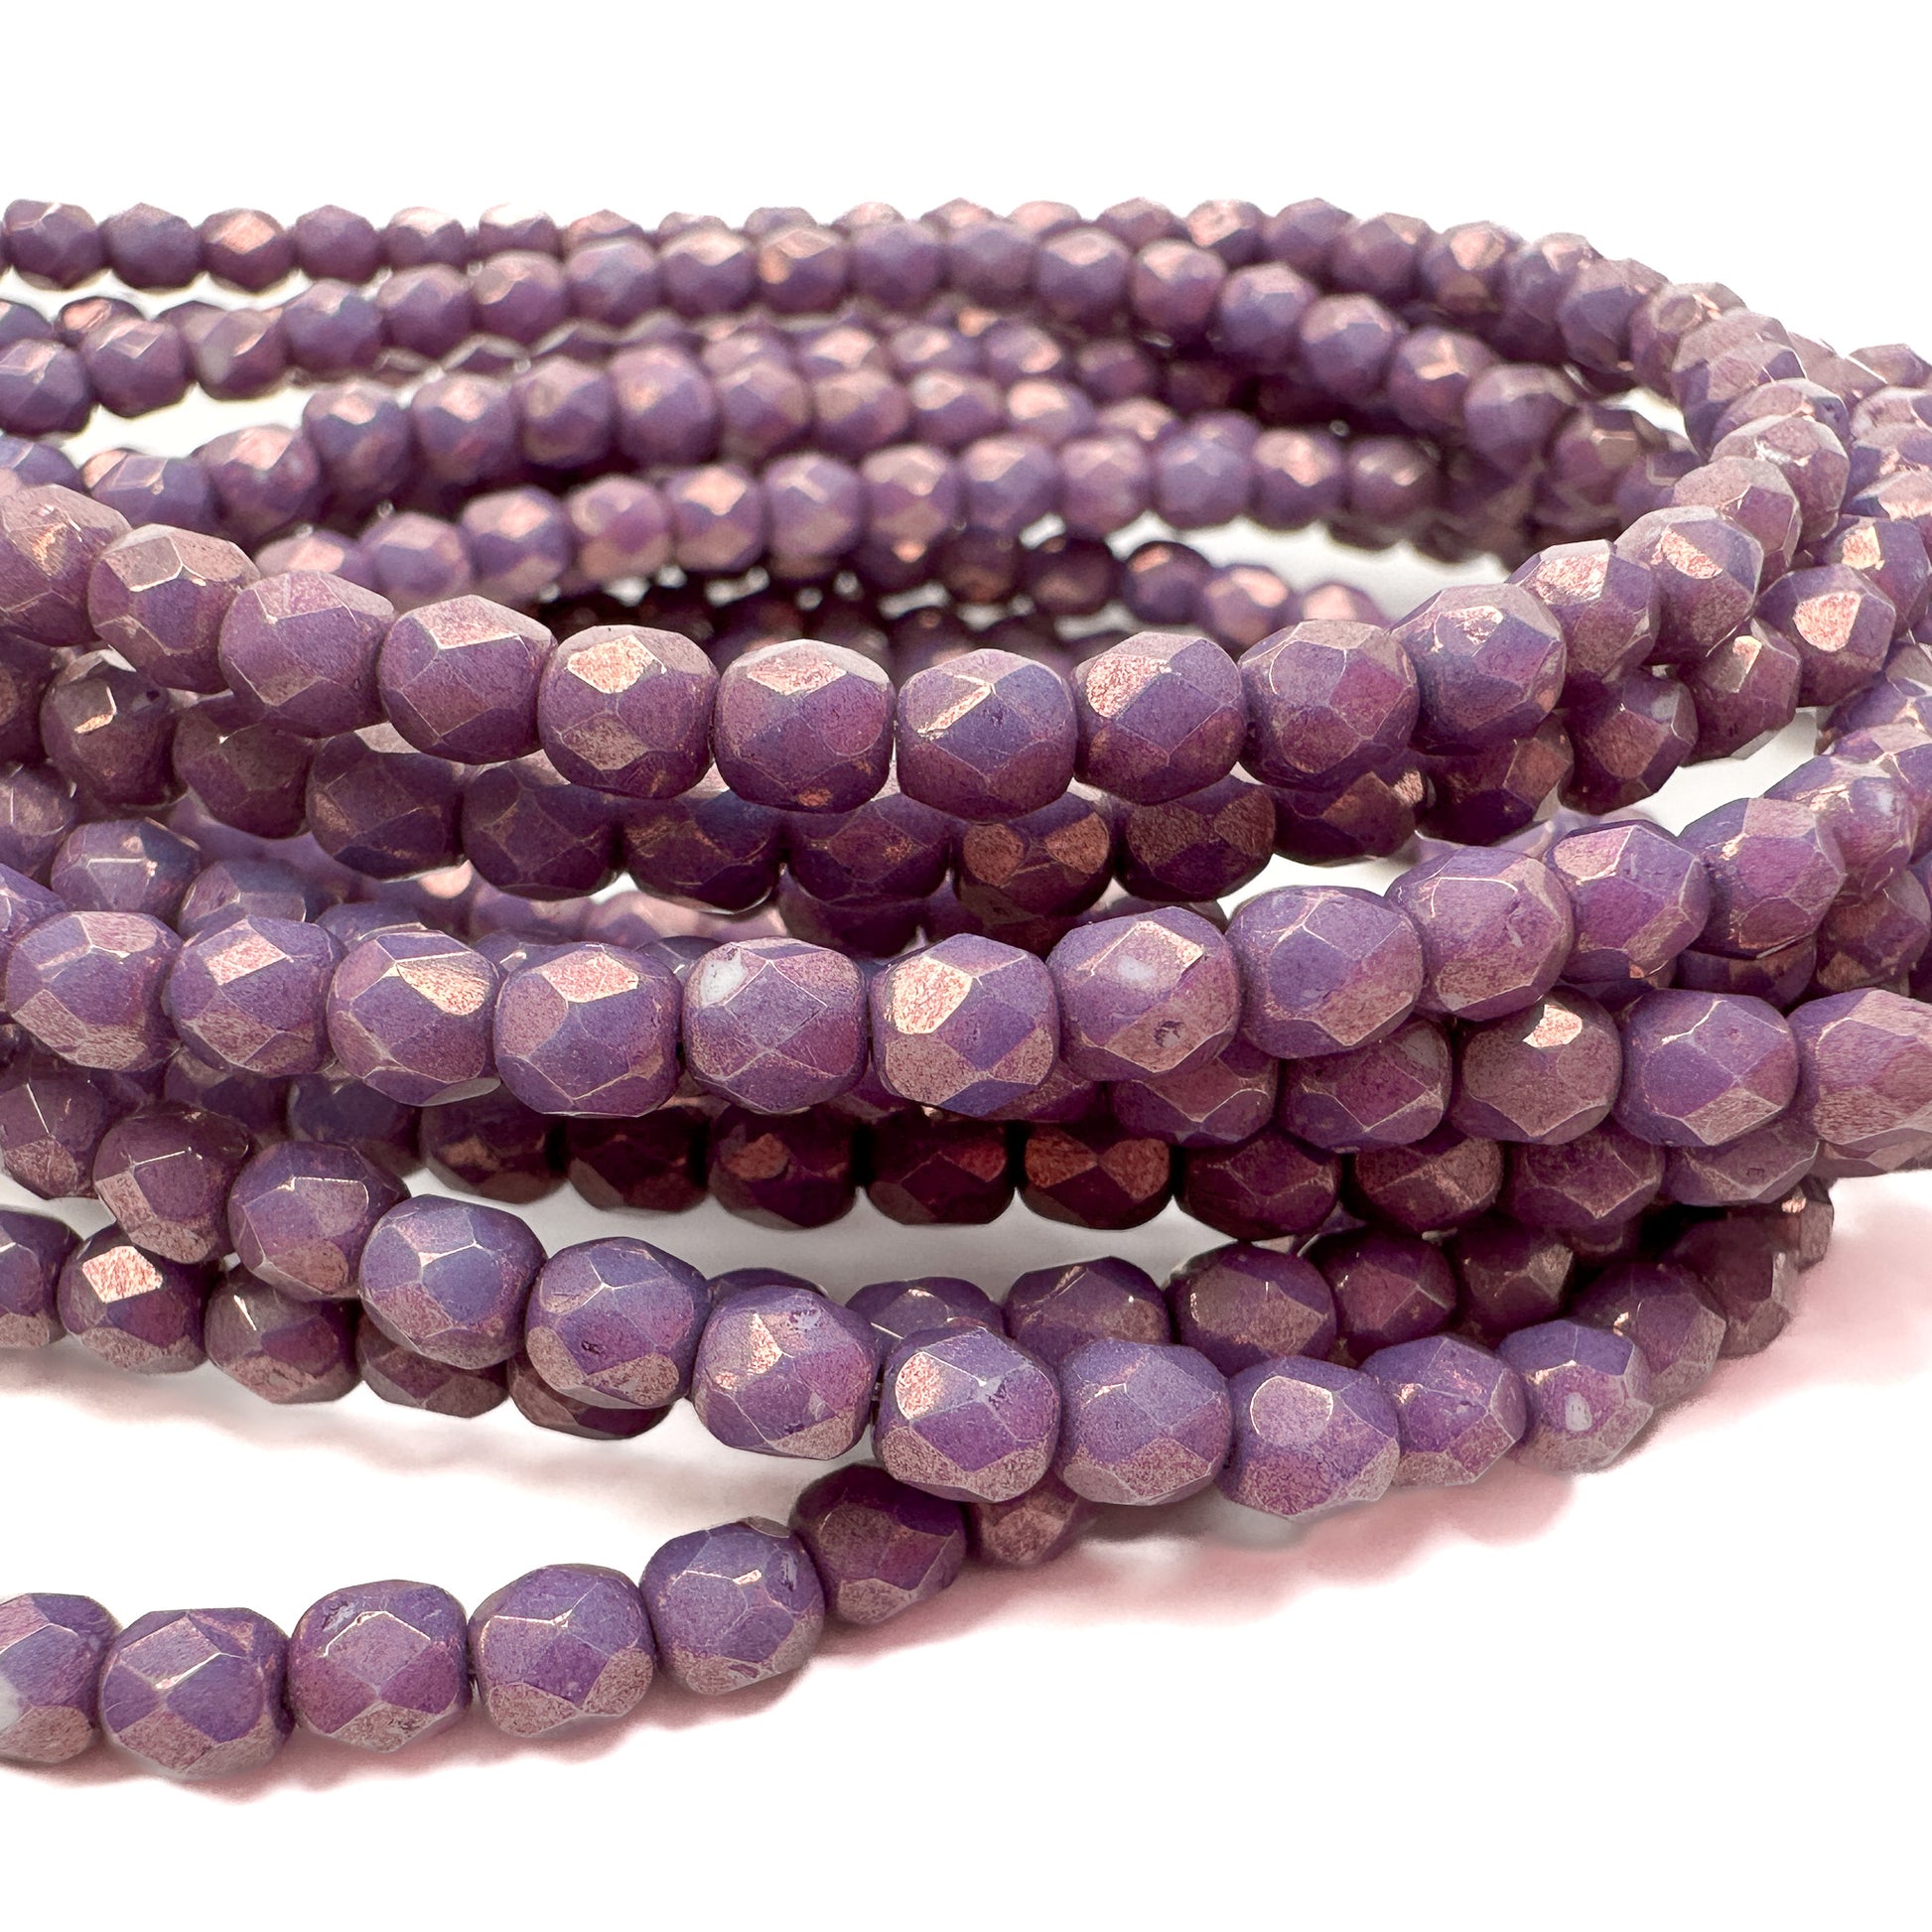 Purple Bronzey Opaque 4mm Faceted Glass Bead - 50 pcs.-The Bead Gallery Honolulu